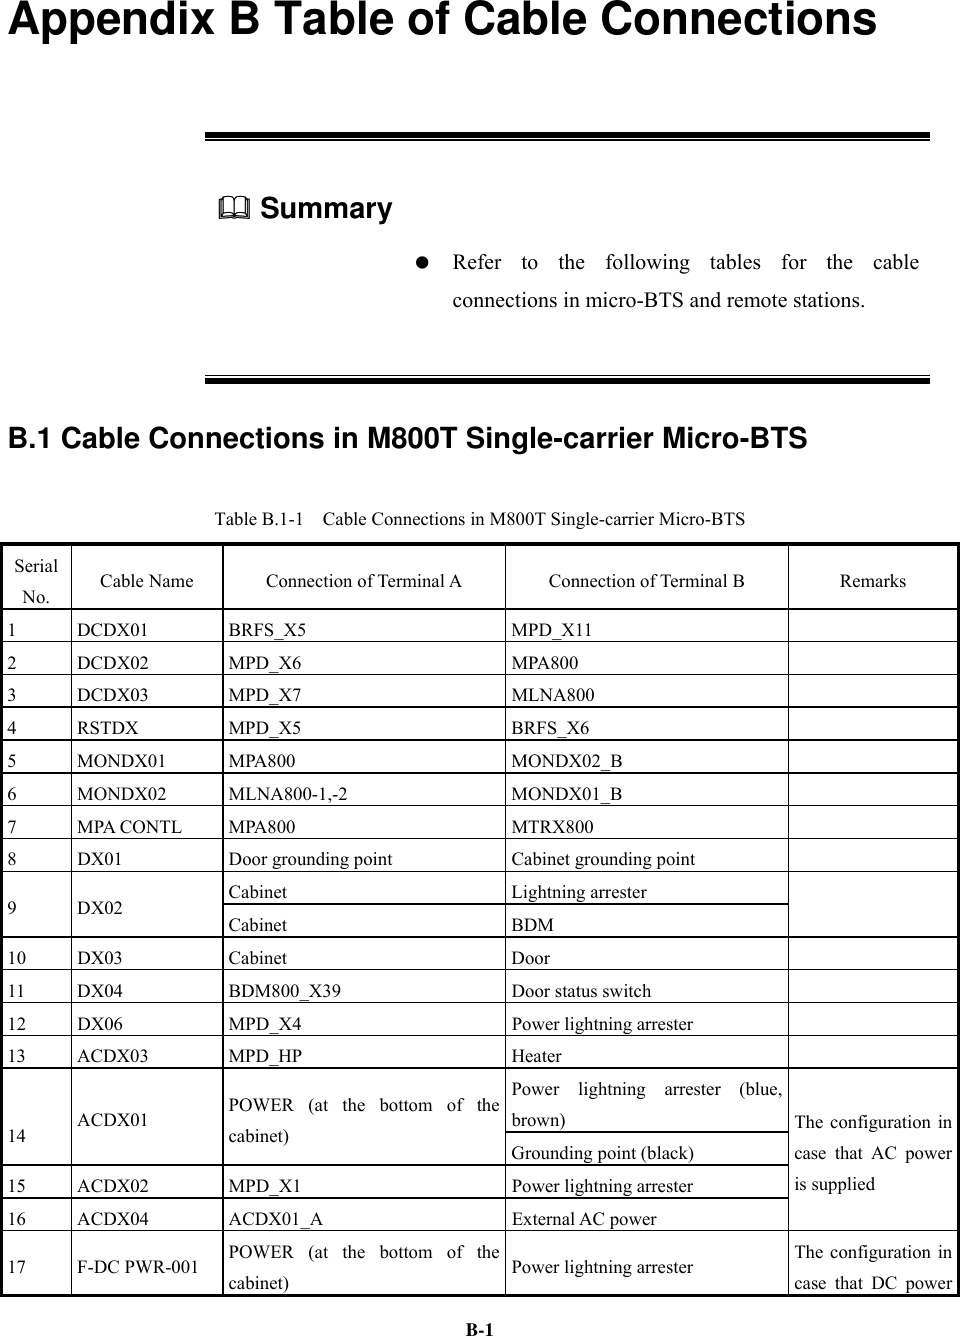   B-1Appendix B Table of Cable Connections  Summary     Refer to the following tables for the cable connections in micro-BTS and remote stations. B.1 Cable Connections in M800T Single-carrier Micro-BTS Table B.1-1    Cable Connections in M800T Single-carrier Micro-BTS Serial No.  Cable Name  Connection of Terminal A  Connection of Terminal B  Remarks 1 DCDX01  BRFS_X5  MPD_X11   2 DCDX02  MPD_X6  MPA800   3 DCDX03  MPD_X7  MLNA800   4 RSTDX  MPD_X5  BRFS_X6   5 MONDX01 MPA800  MONDX02_B   6 MONDX02 MLNA800-1,-2  MONDX01_B   7 MPA CONTL MPA800  MTRX800   8  DX01  Door grounding point  Cabinet grounding point   Cabinet Lightning arrester  9 DX02 Cabinet BDM  10 DX03  Cabinet  Door   11  DX04  BDM800_X39  Door status switch   12  DX06  MPD_X4  Power lightning arrester   13 ACDX03  MPD_HP  Heater   Power lightning arrester (blue, brown)  14  ACDX01  POWER (at the bottom of the cabinet) Grounding point (black) 15  ACDX02  MPD_X1  Power lightning arrester 16 ACDX04  ACDX01_A  External AC power The configuration in case that AC power is supplied 17 F-DC PWR-001 POWER (at the bottom of the cabinet)  Power lightning arrester  The configuration in case that DC power 